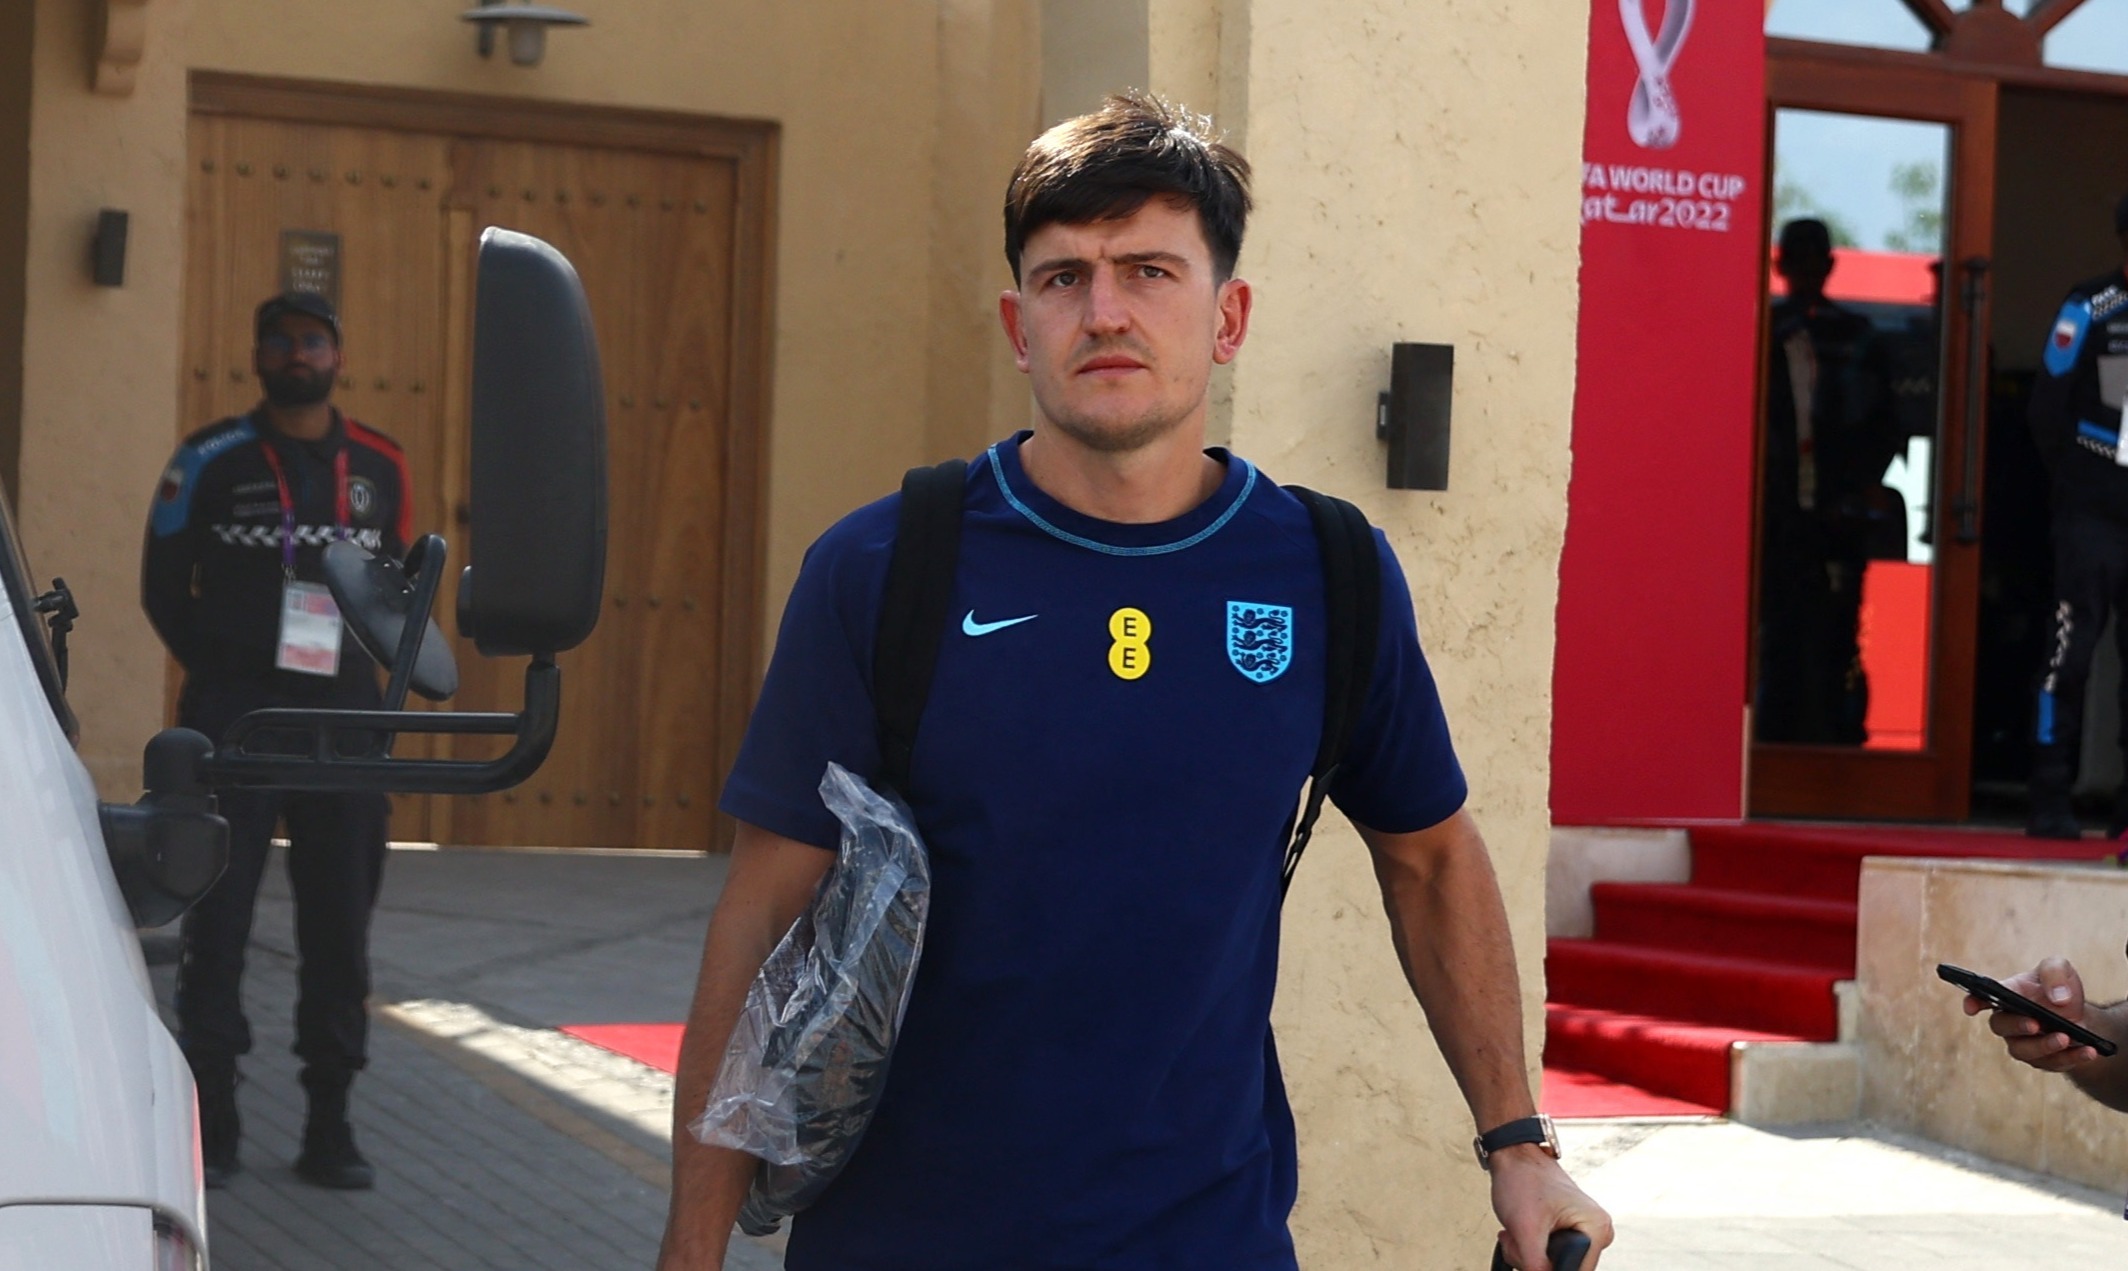 , England’s unofficial World Cup mascot Dave the cat joins squad leaving Qatar hotel as he prepares for new life in UK